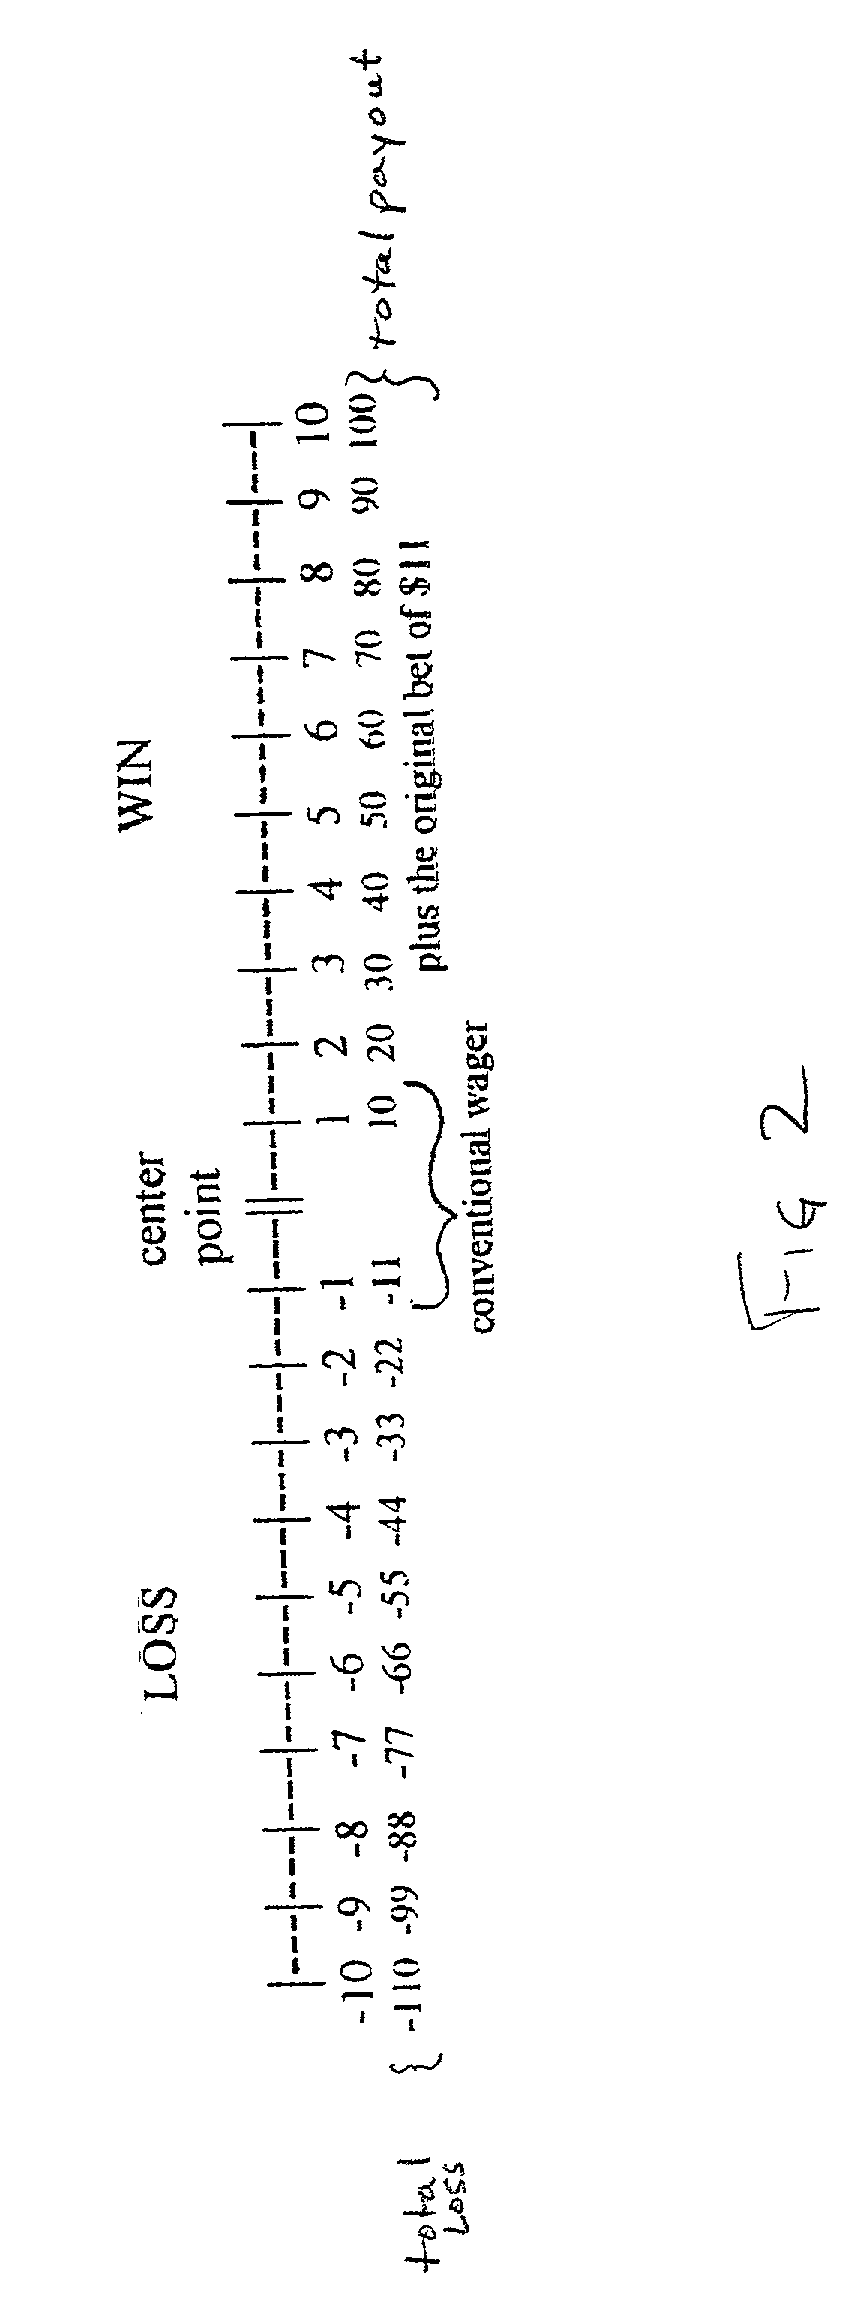 Method of effecting multiple wagers on a sports or other event